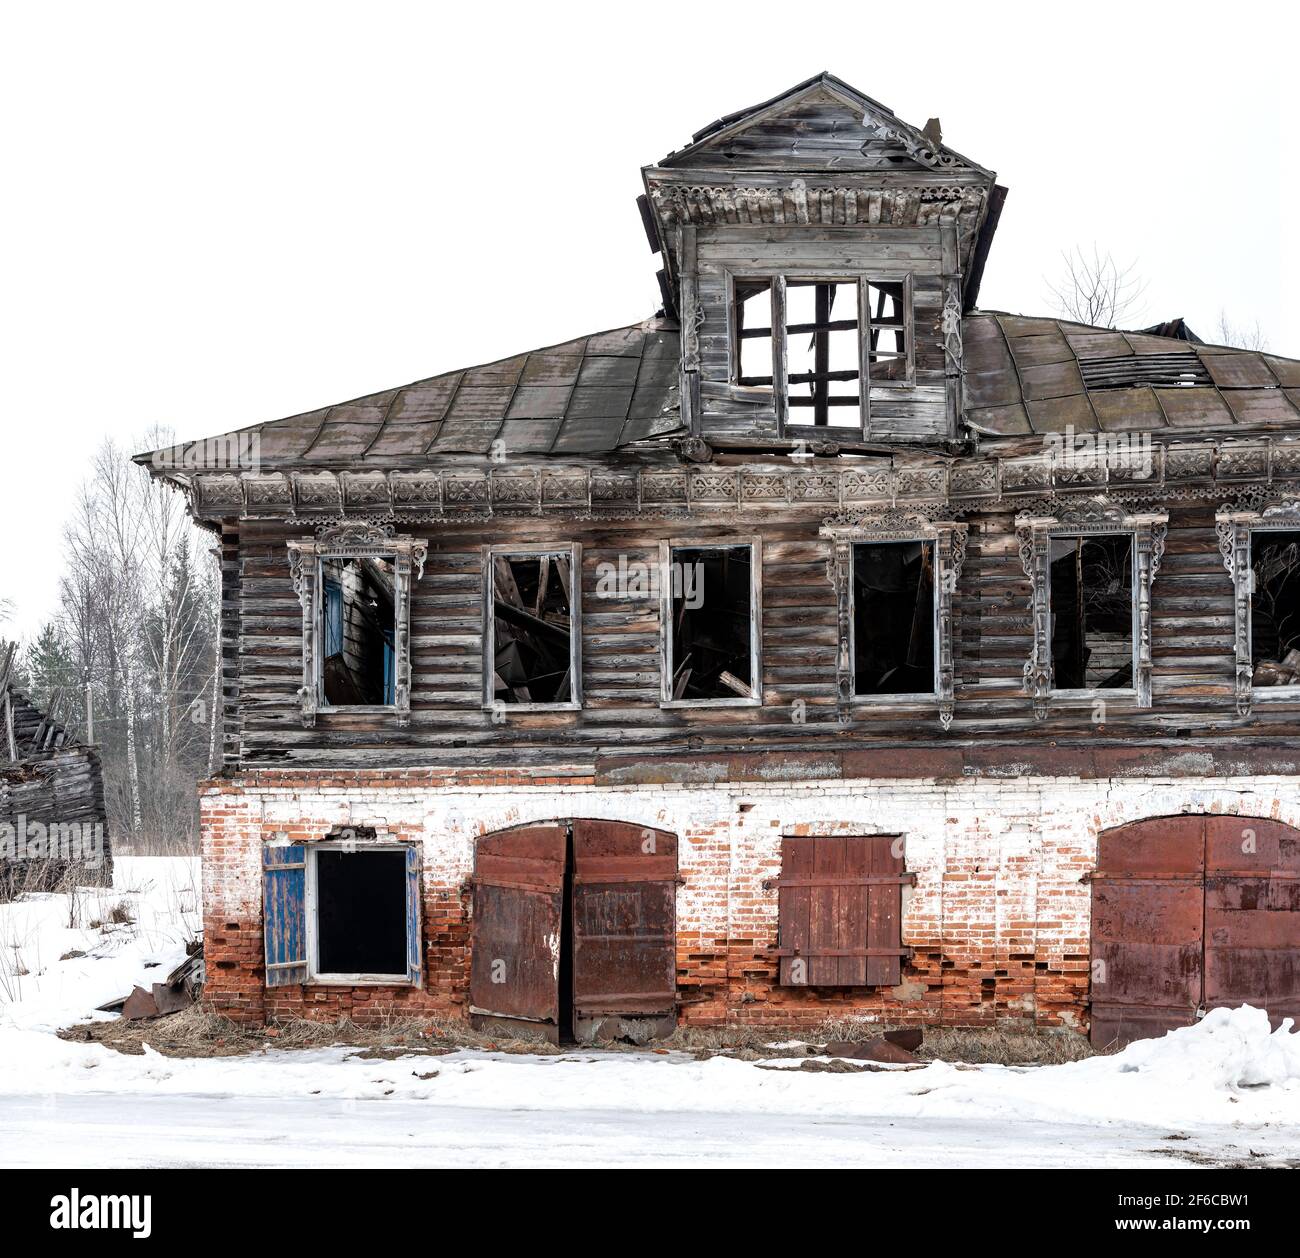 Old wooden destroyed russian house ruined made of wood and bricks metal doors Stock Photo